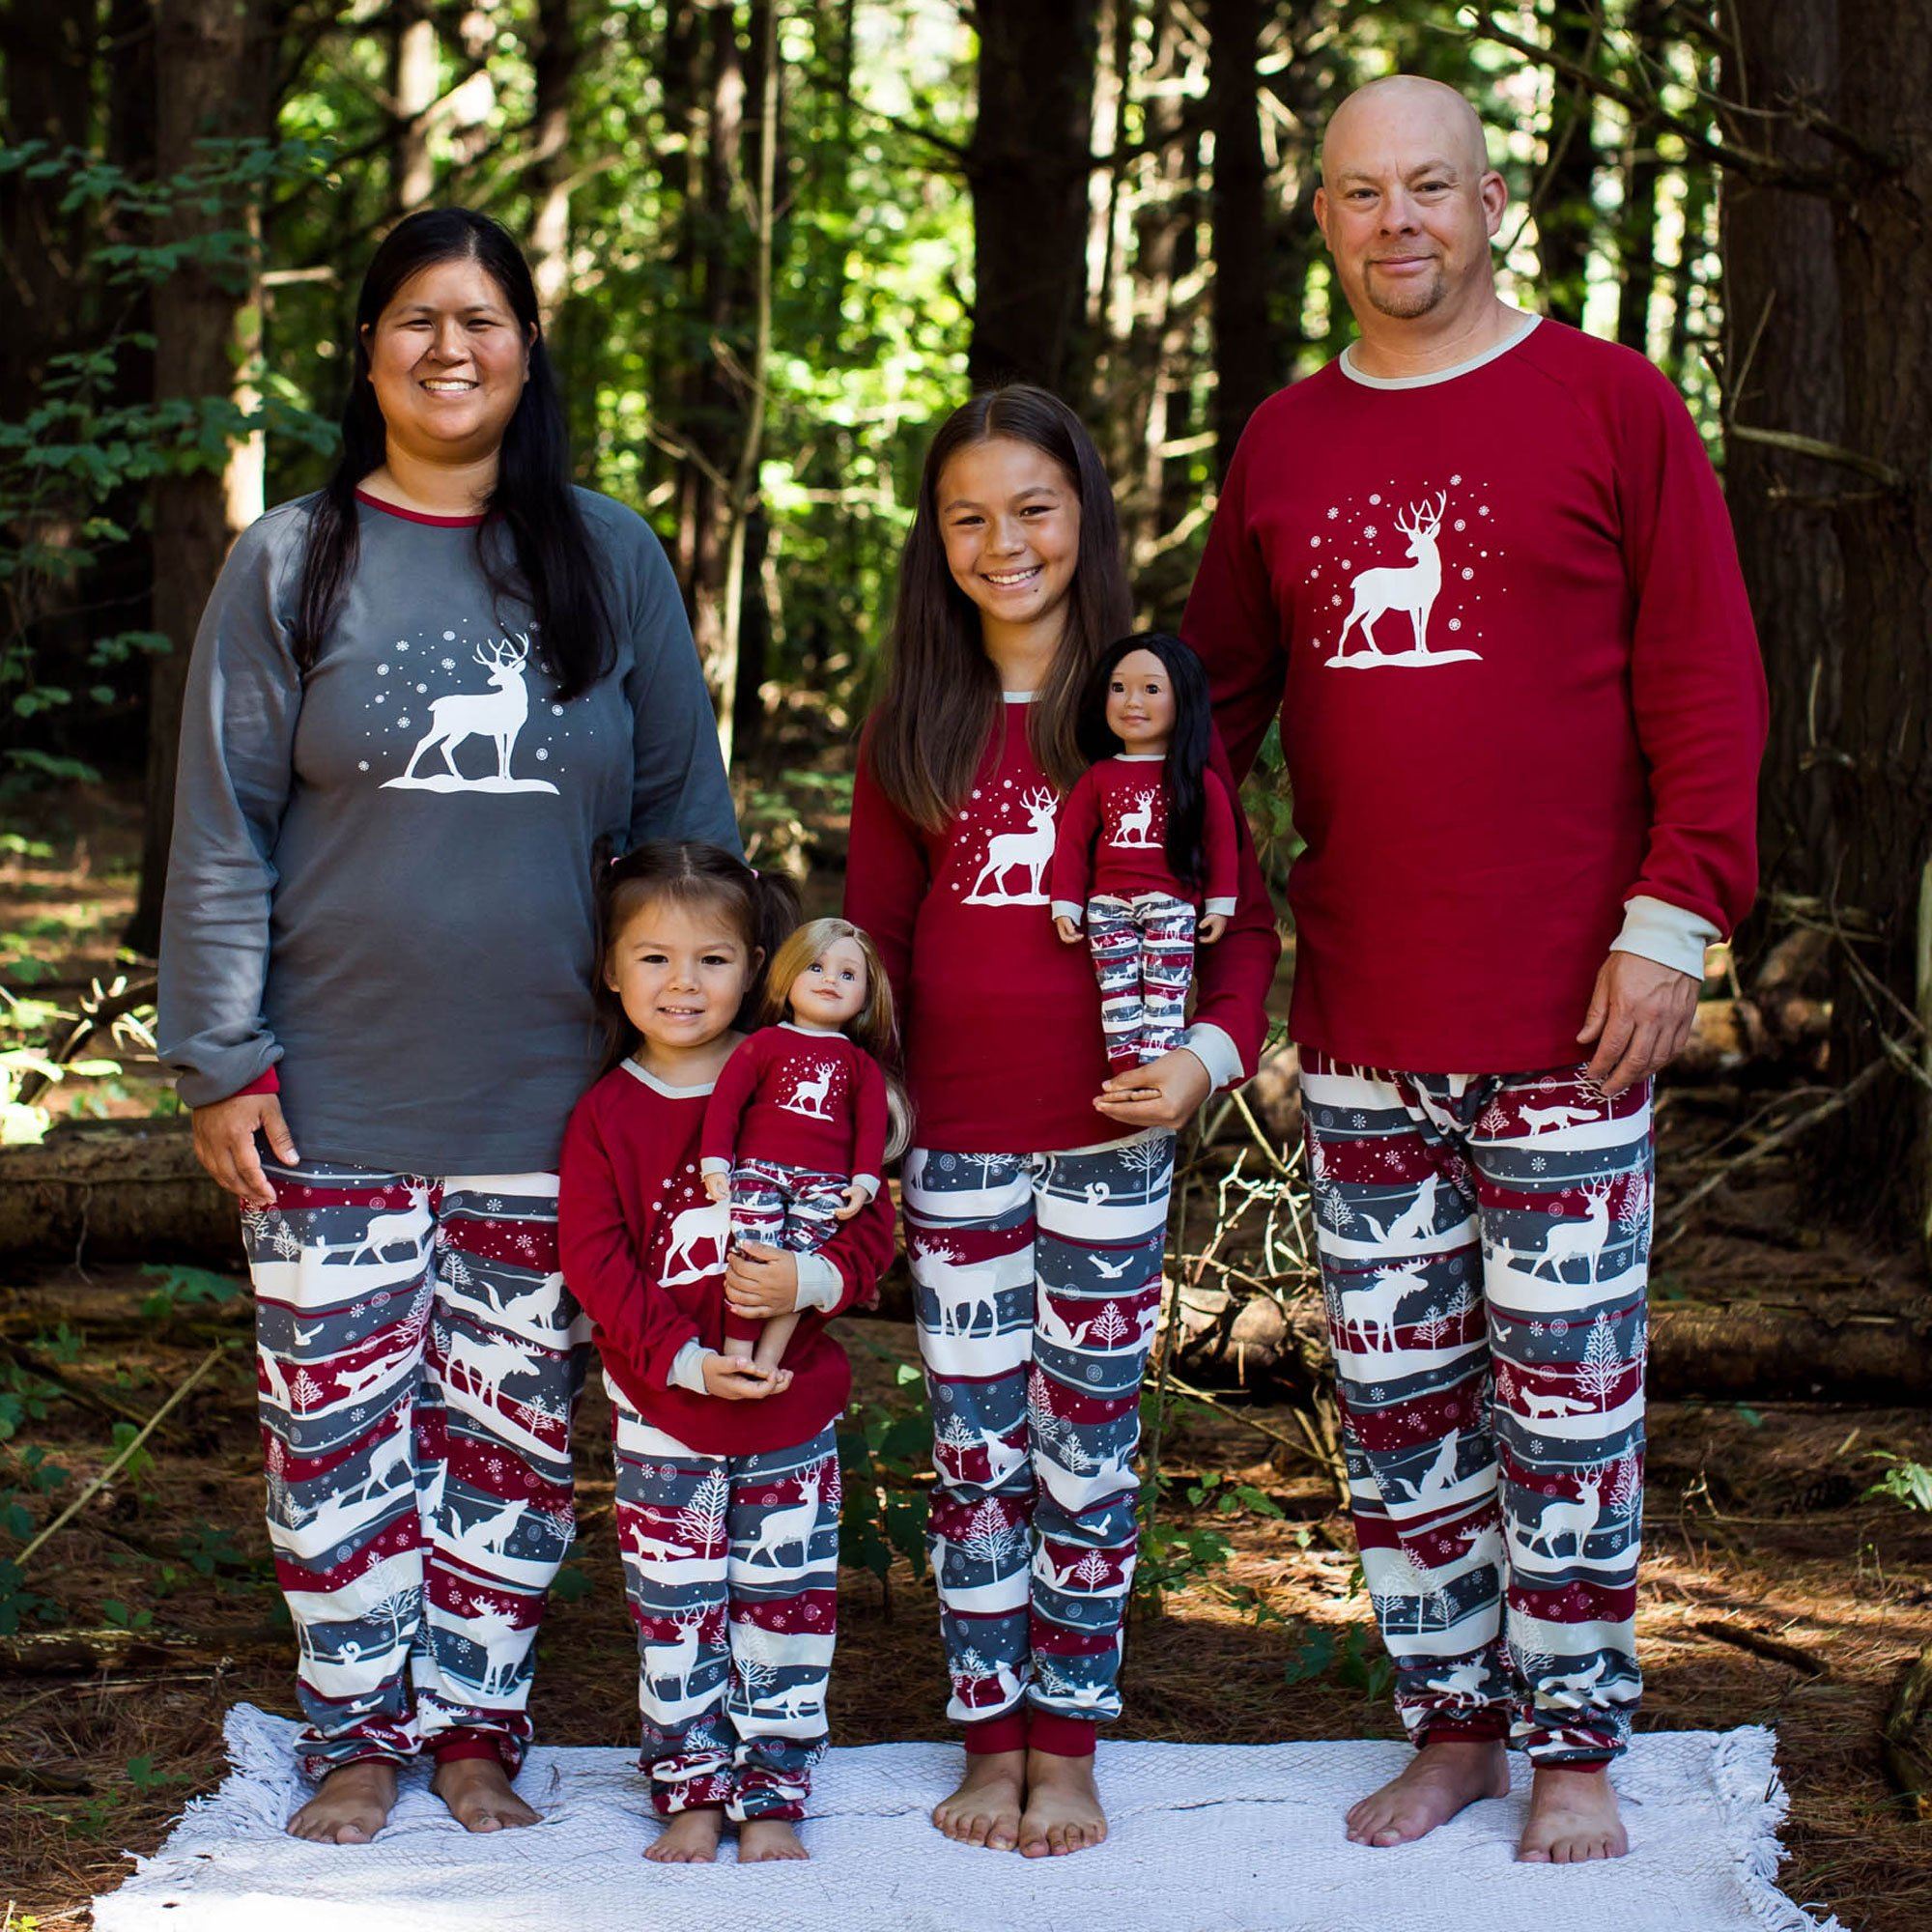 Mom dad two children and 18 inch dolls wearing matching pajamas with a winter theme.